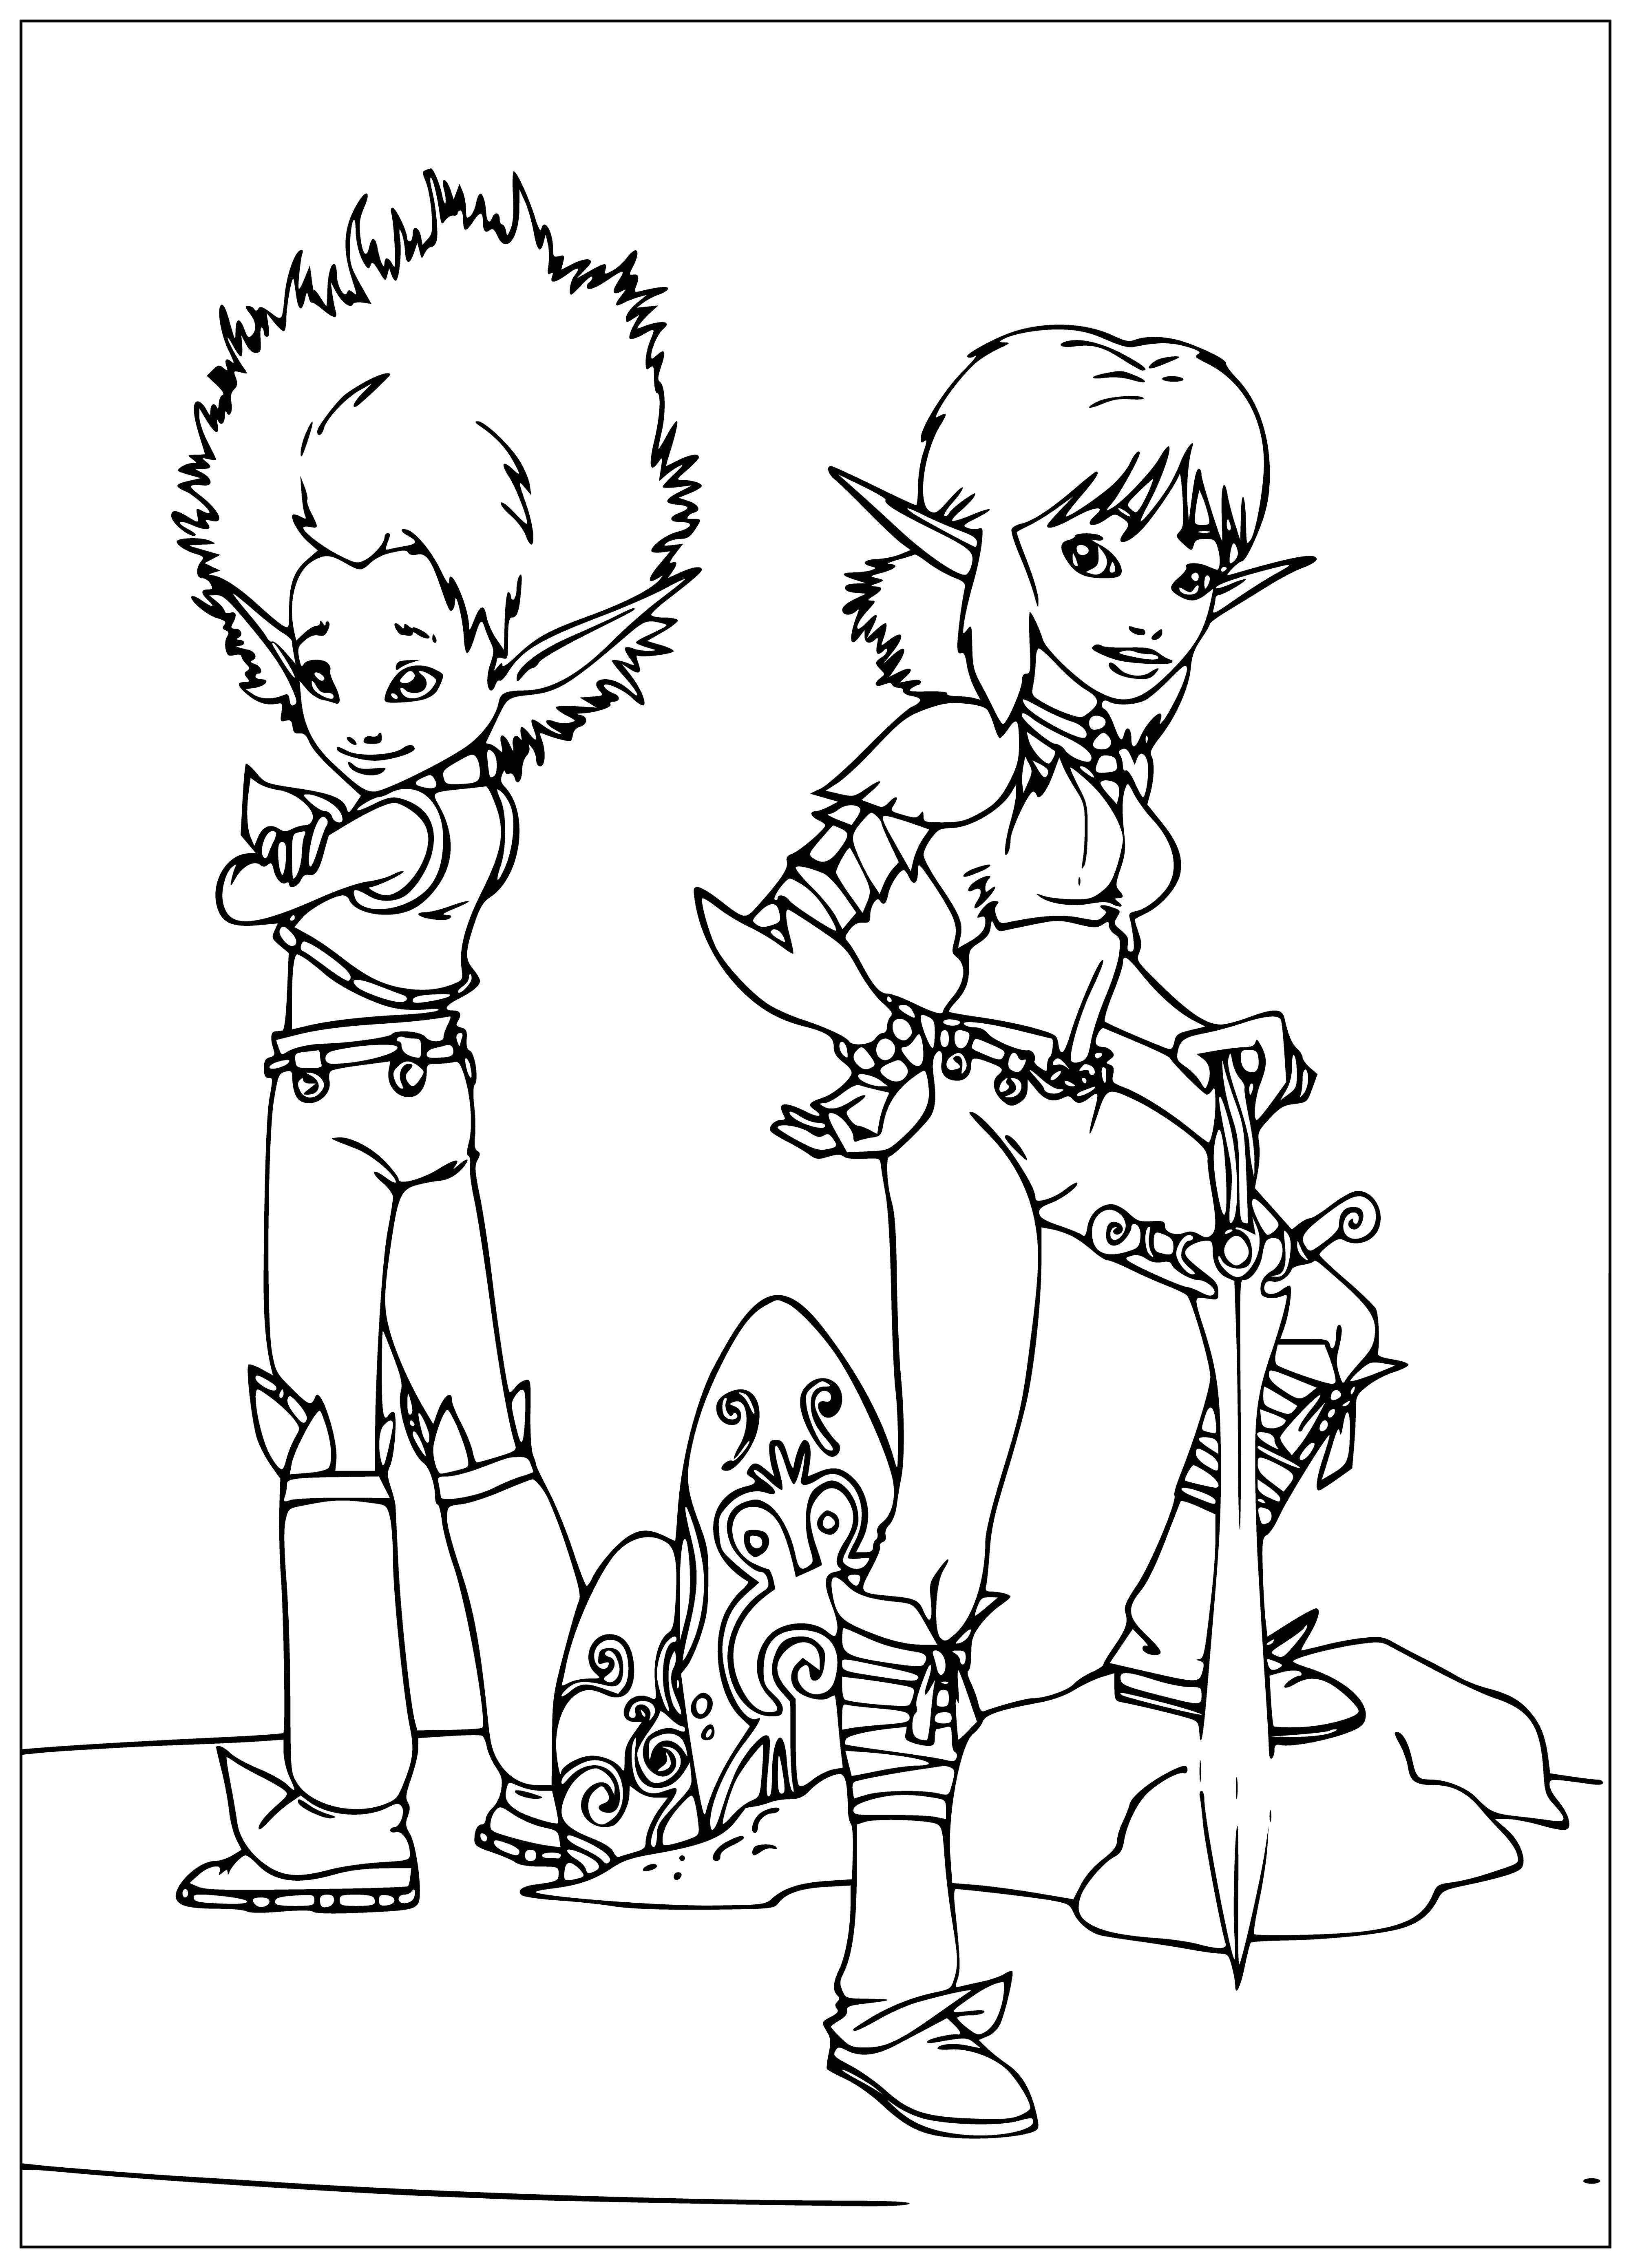 Arthur and Selenia coloring page